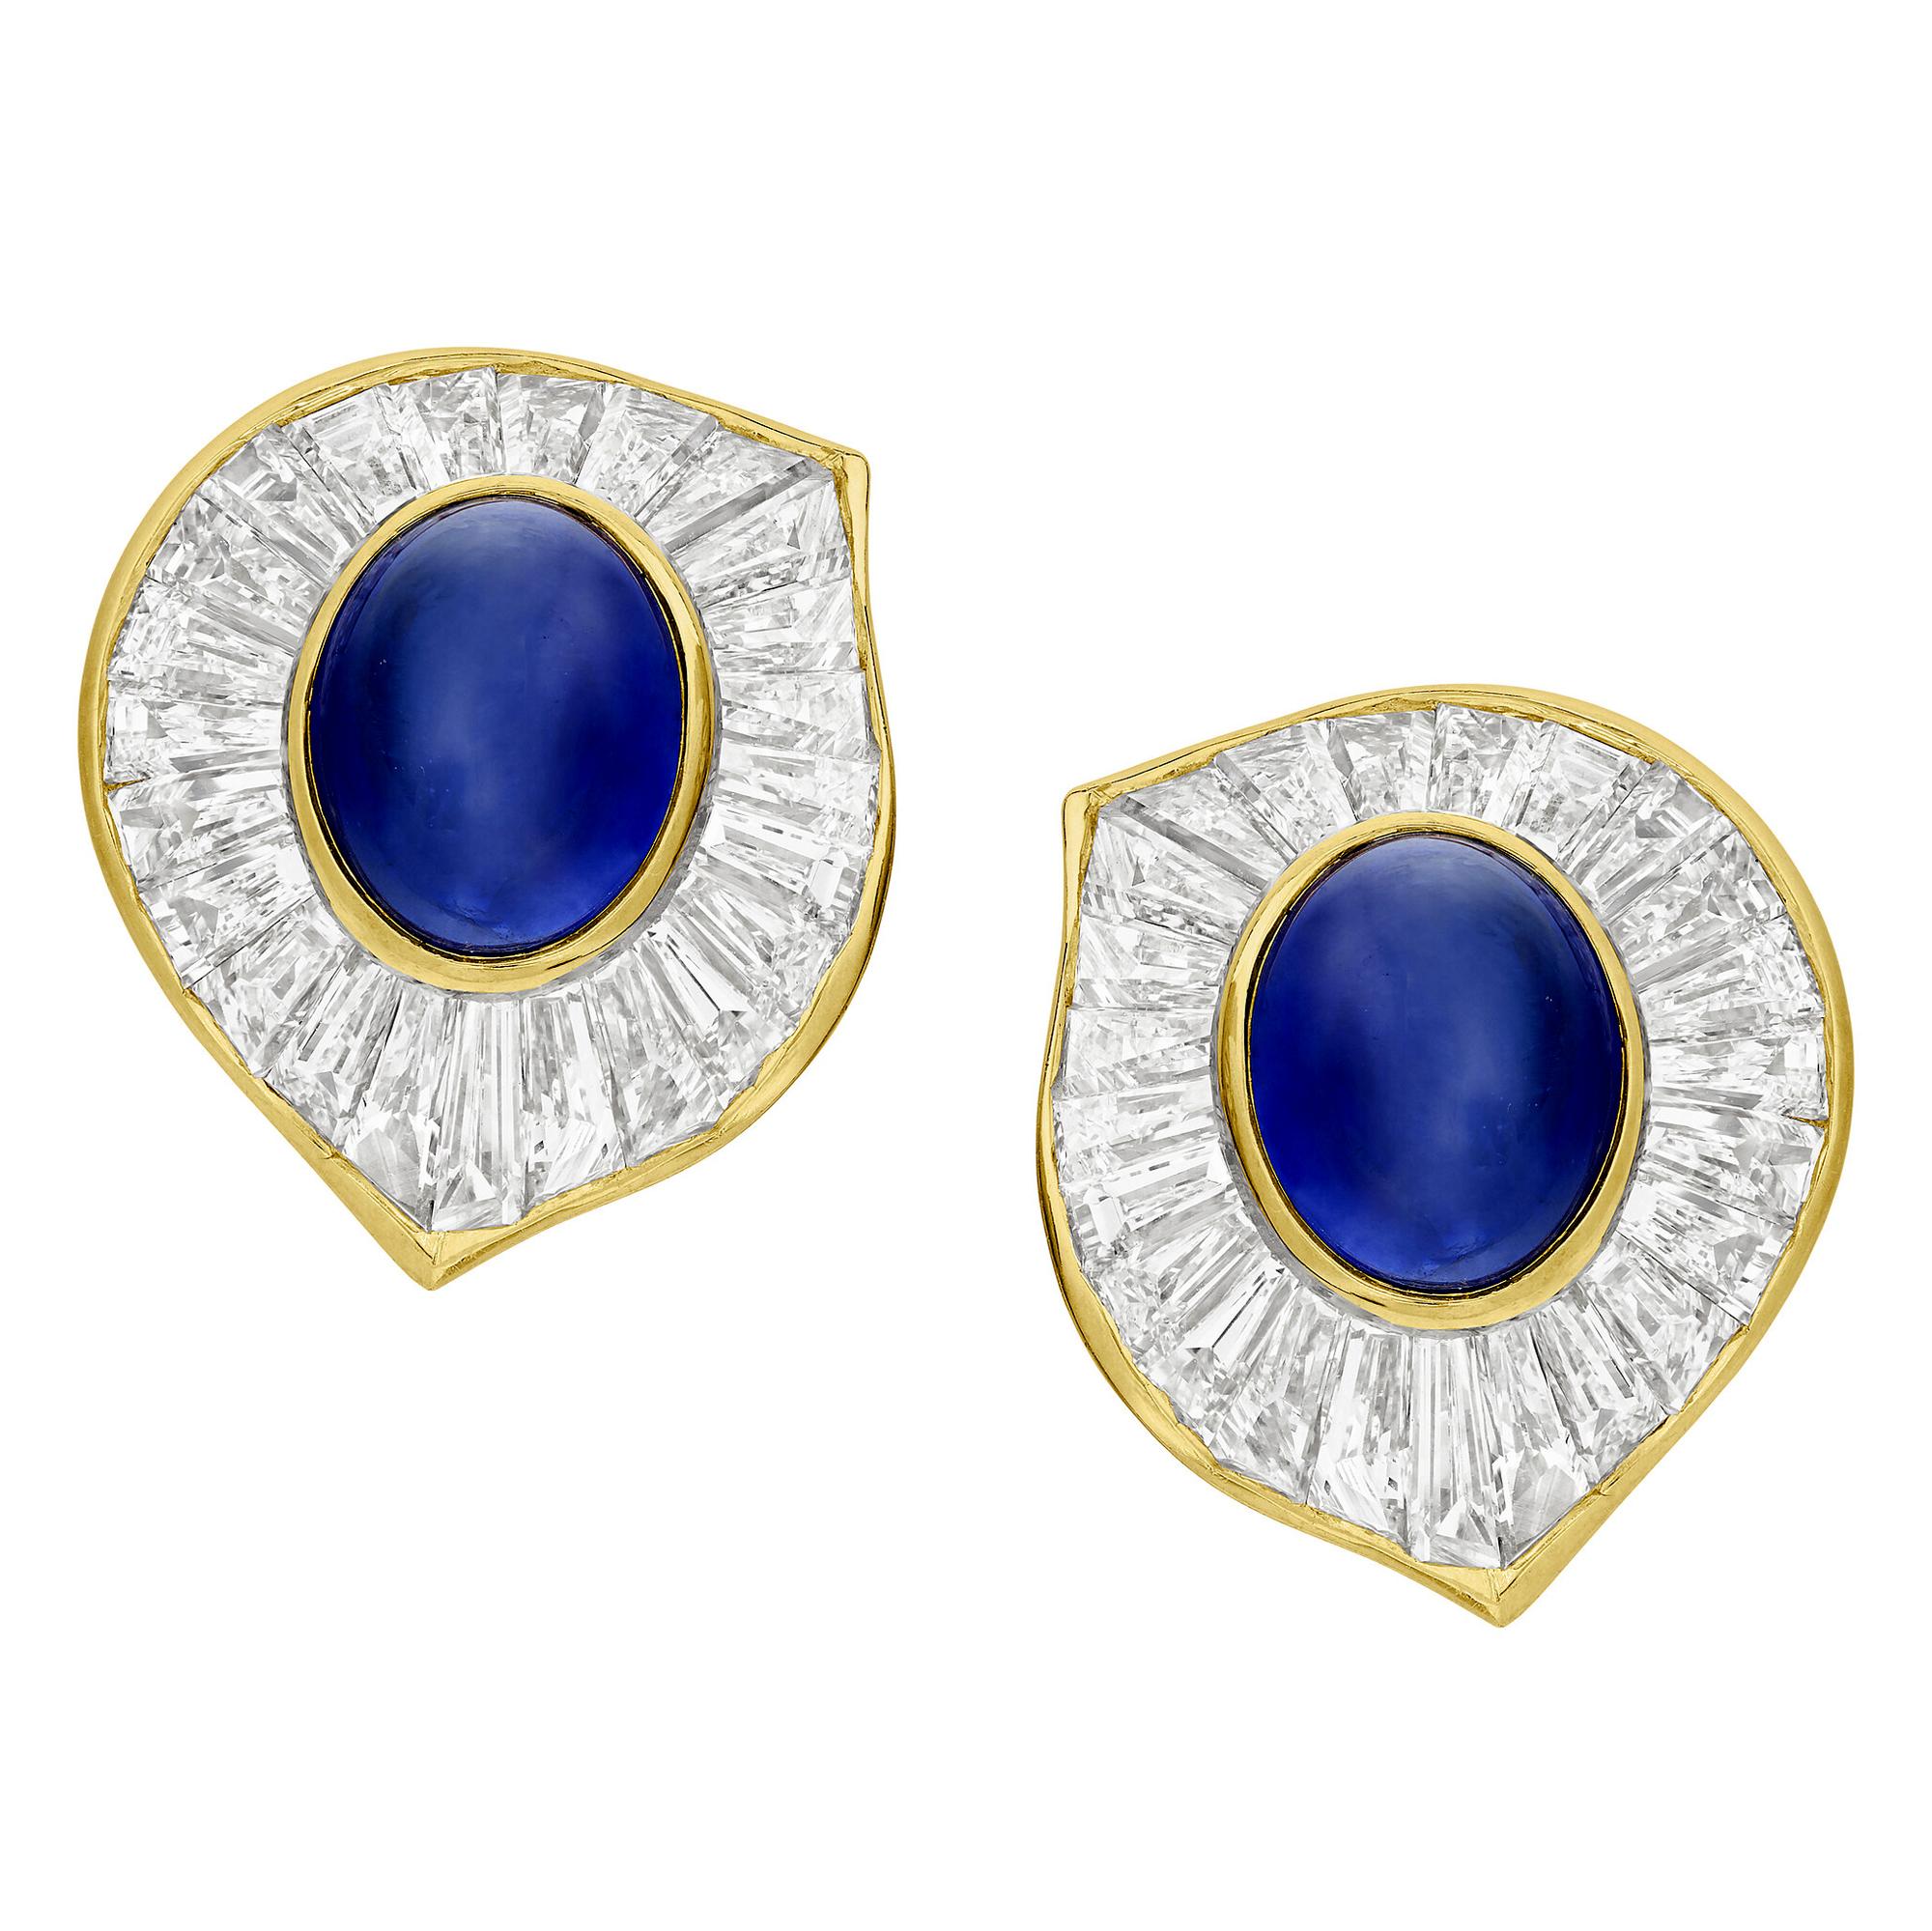 This exquisite pair of vintage cufflinks by Harry Winston epitomizes luxury and sophistication, blending masterful craftsmanship with timeless design. Central to each cufflink are magnificent cabochon sapphires, each weighing approximately 4 carats,